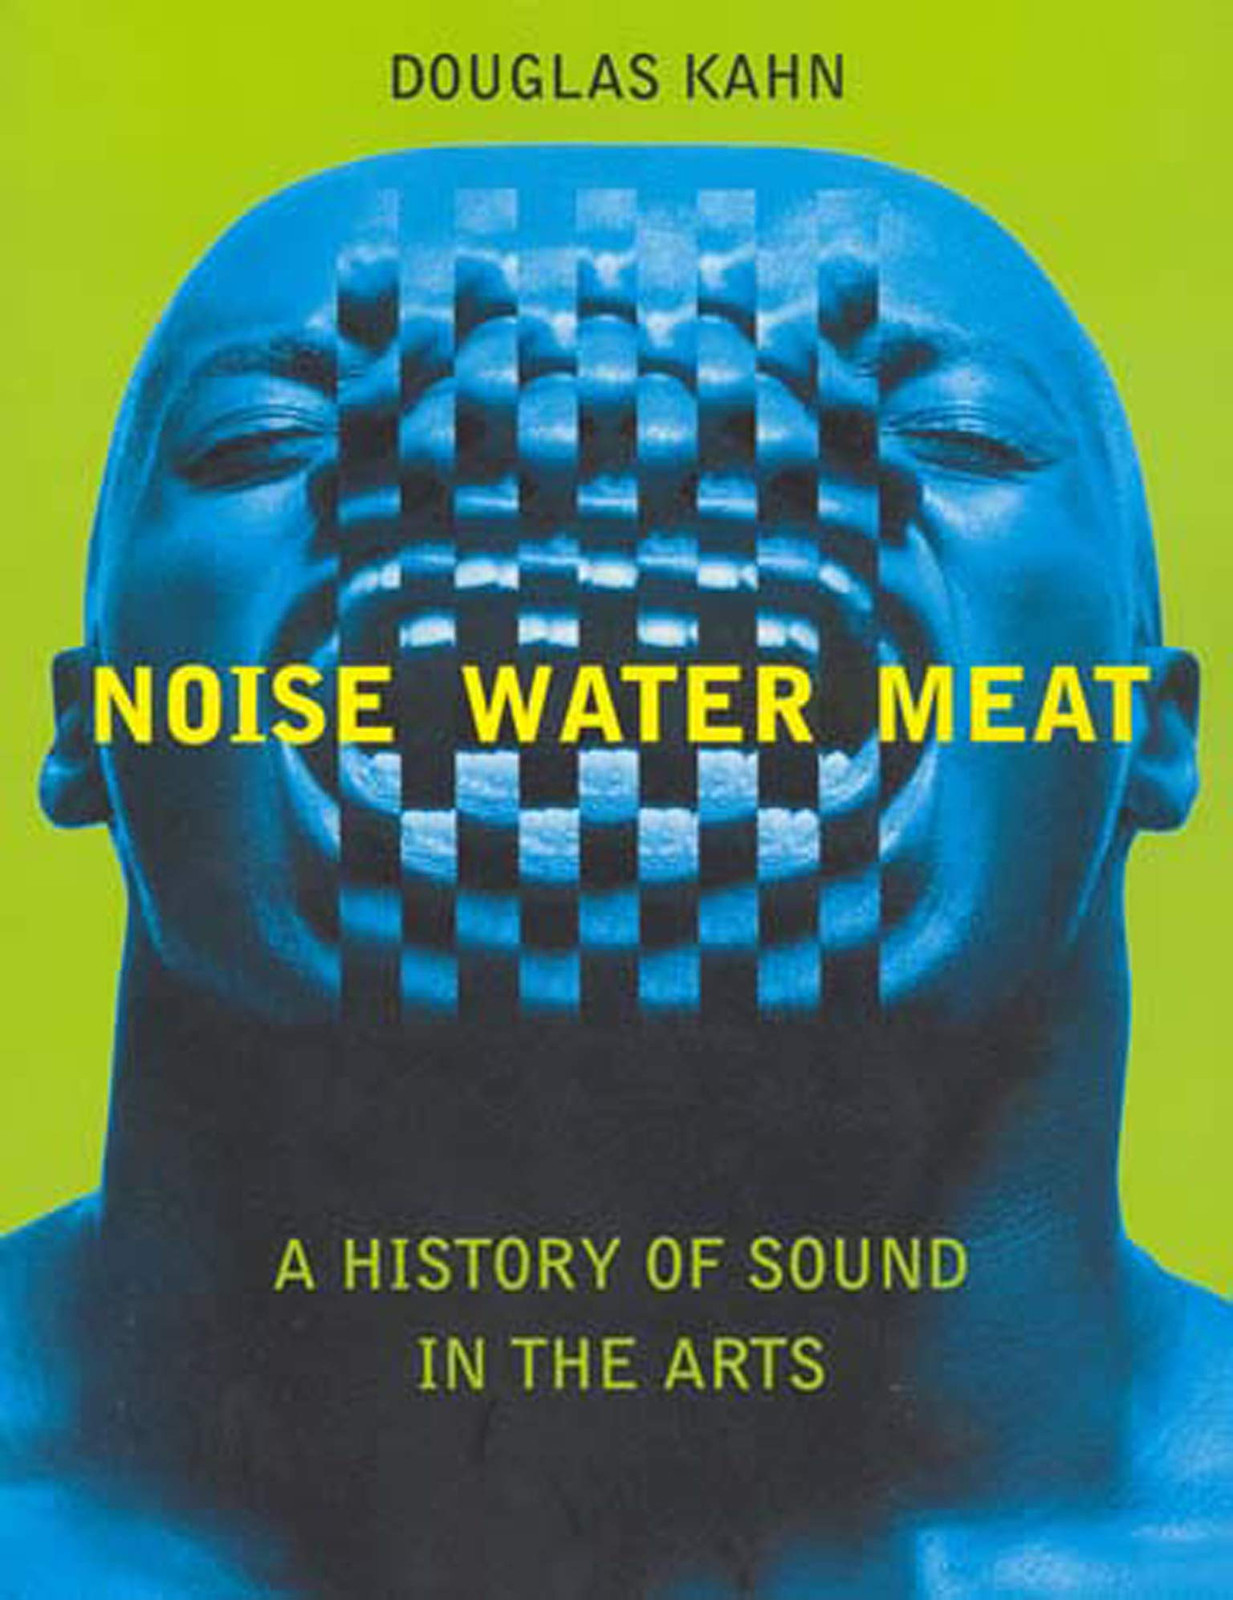 Kahn Douglas. Noise, Water, Meat: A History of Sound in the Arts, The MIT Press, 1999